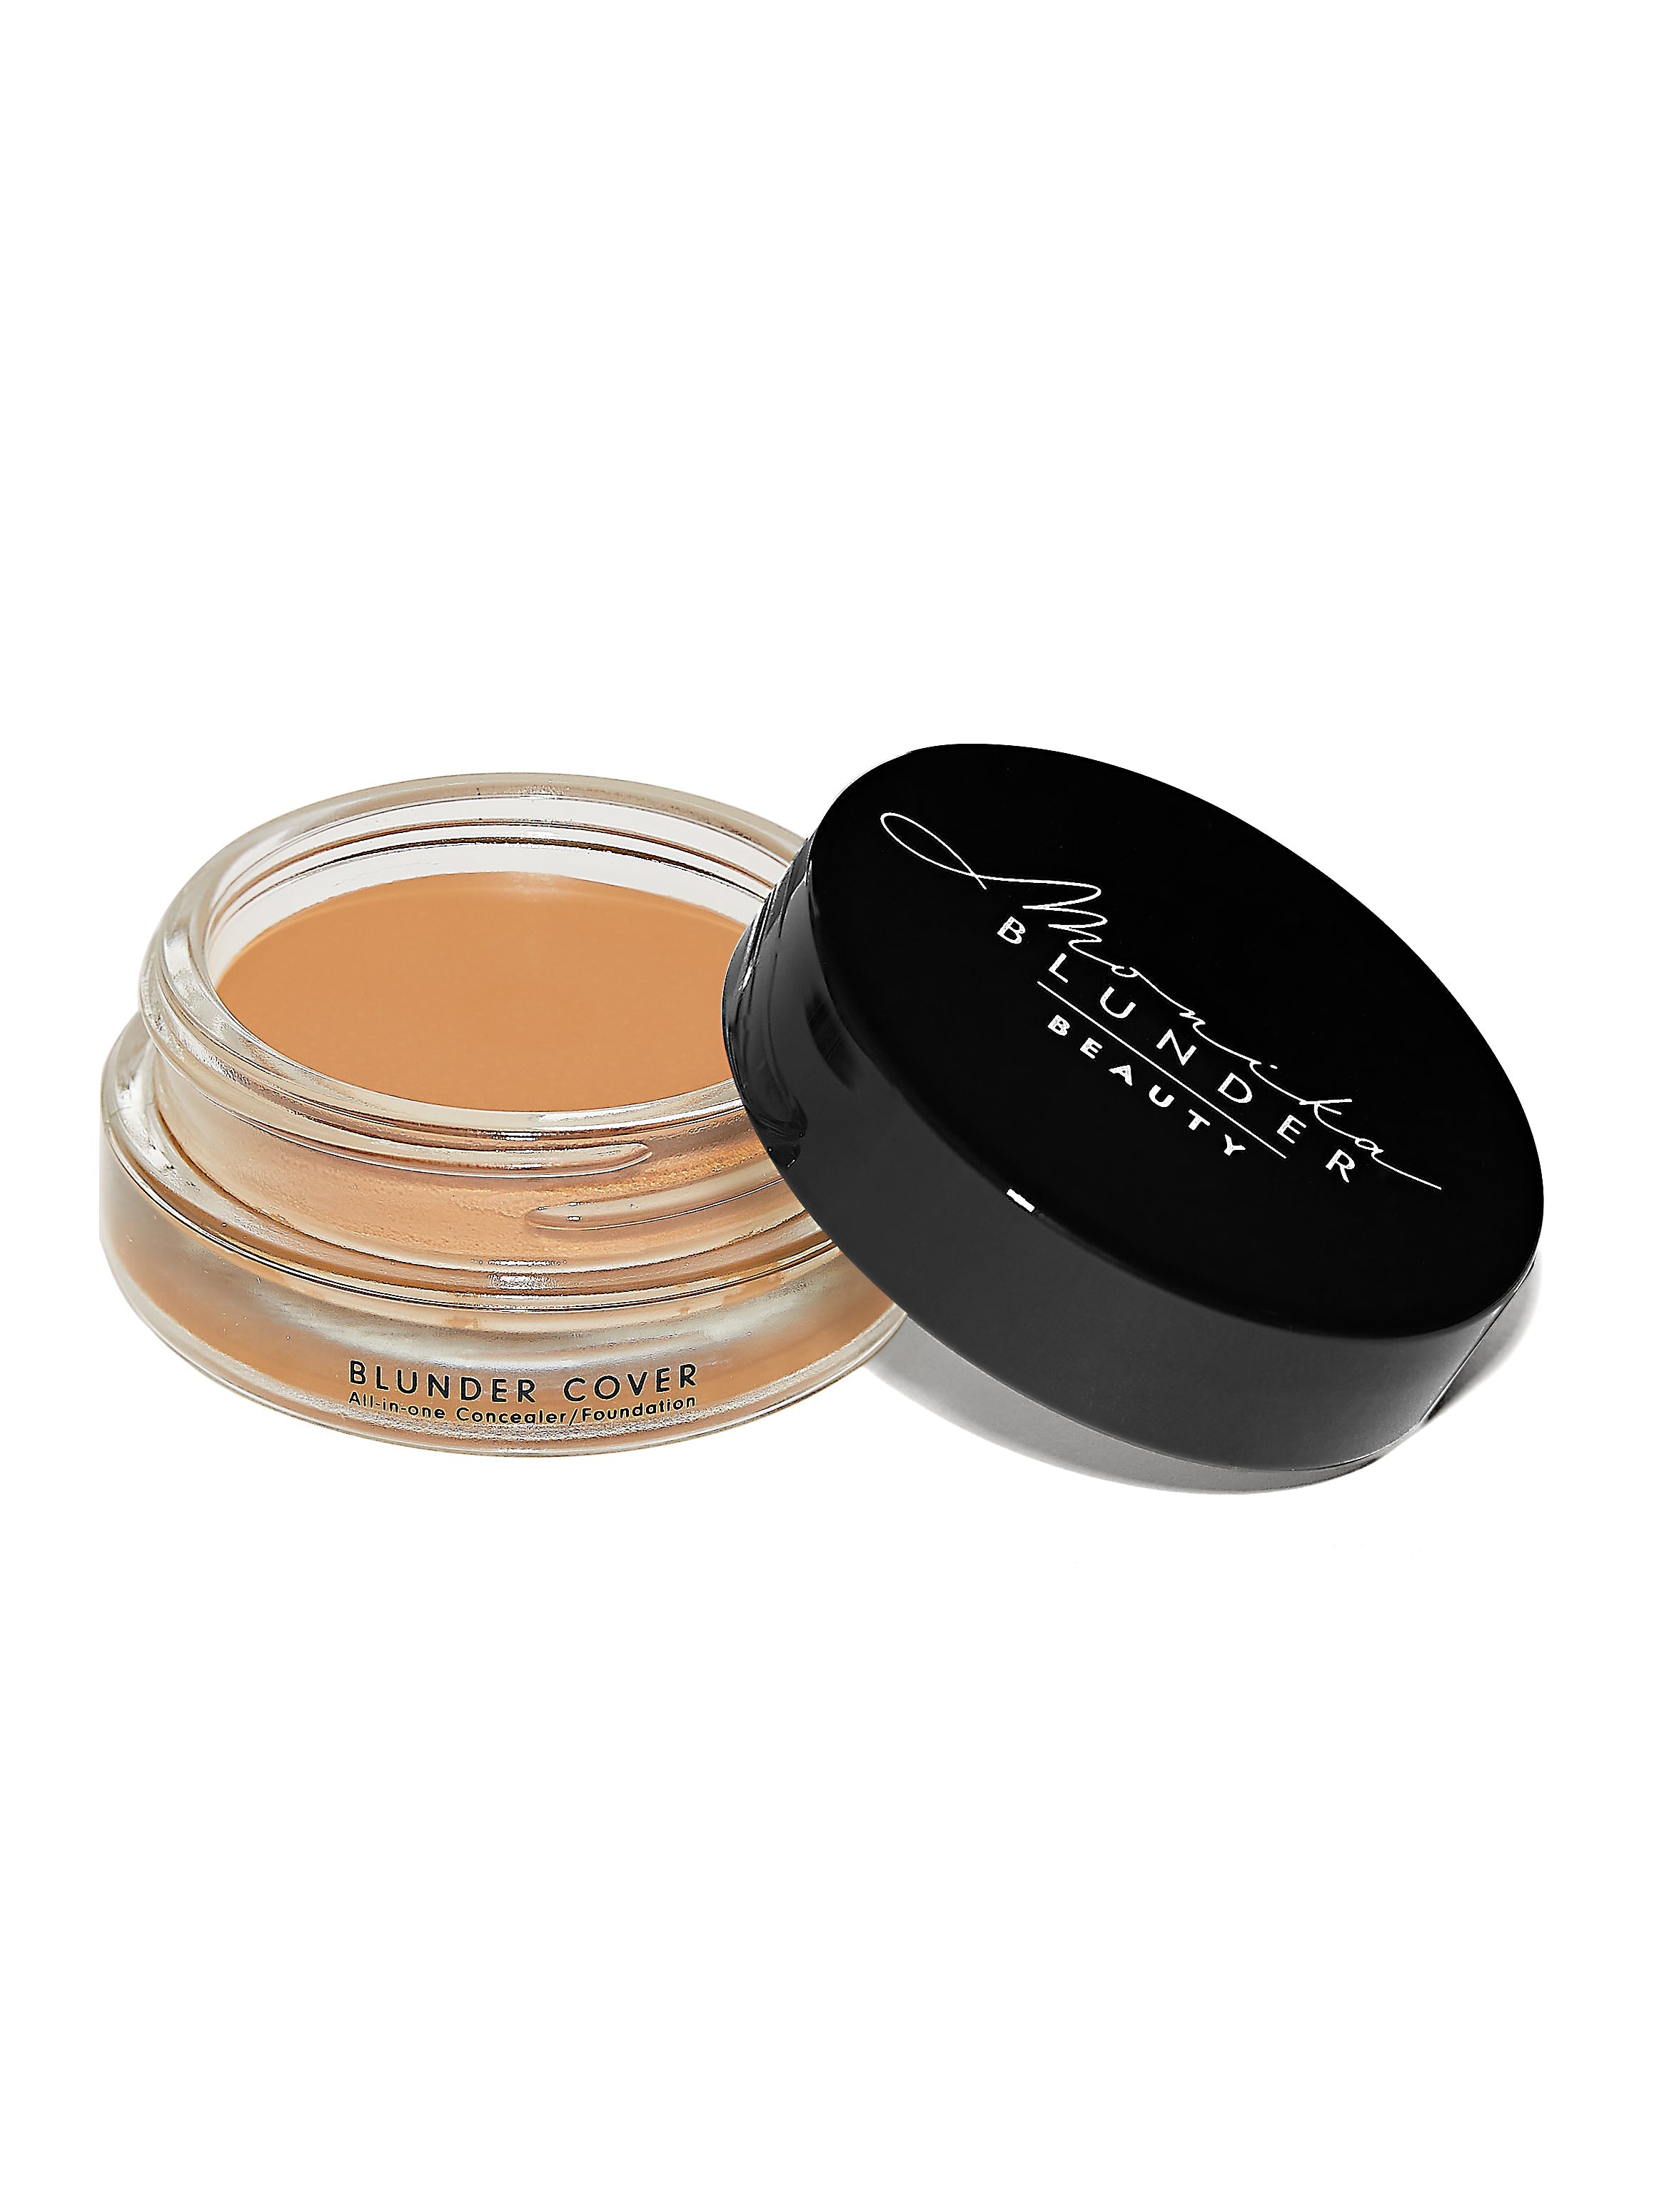 Blunder Cover an All-In-One Foundation/Concealer Shade - Fünf - 0